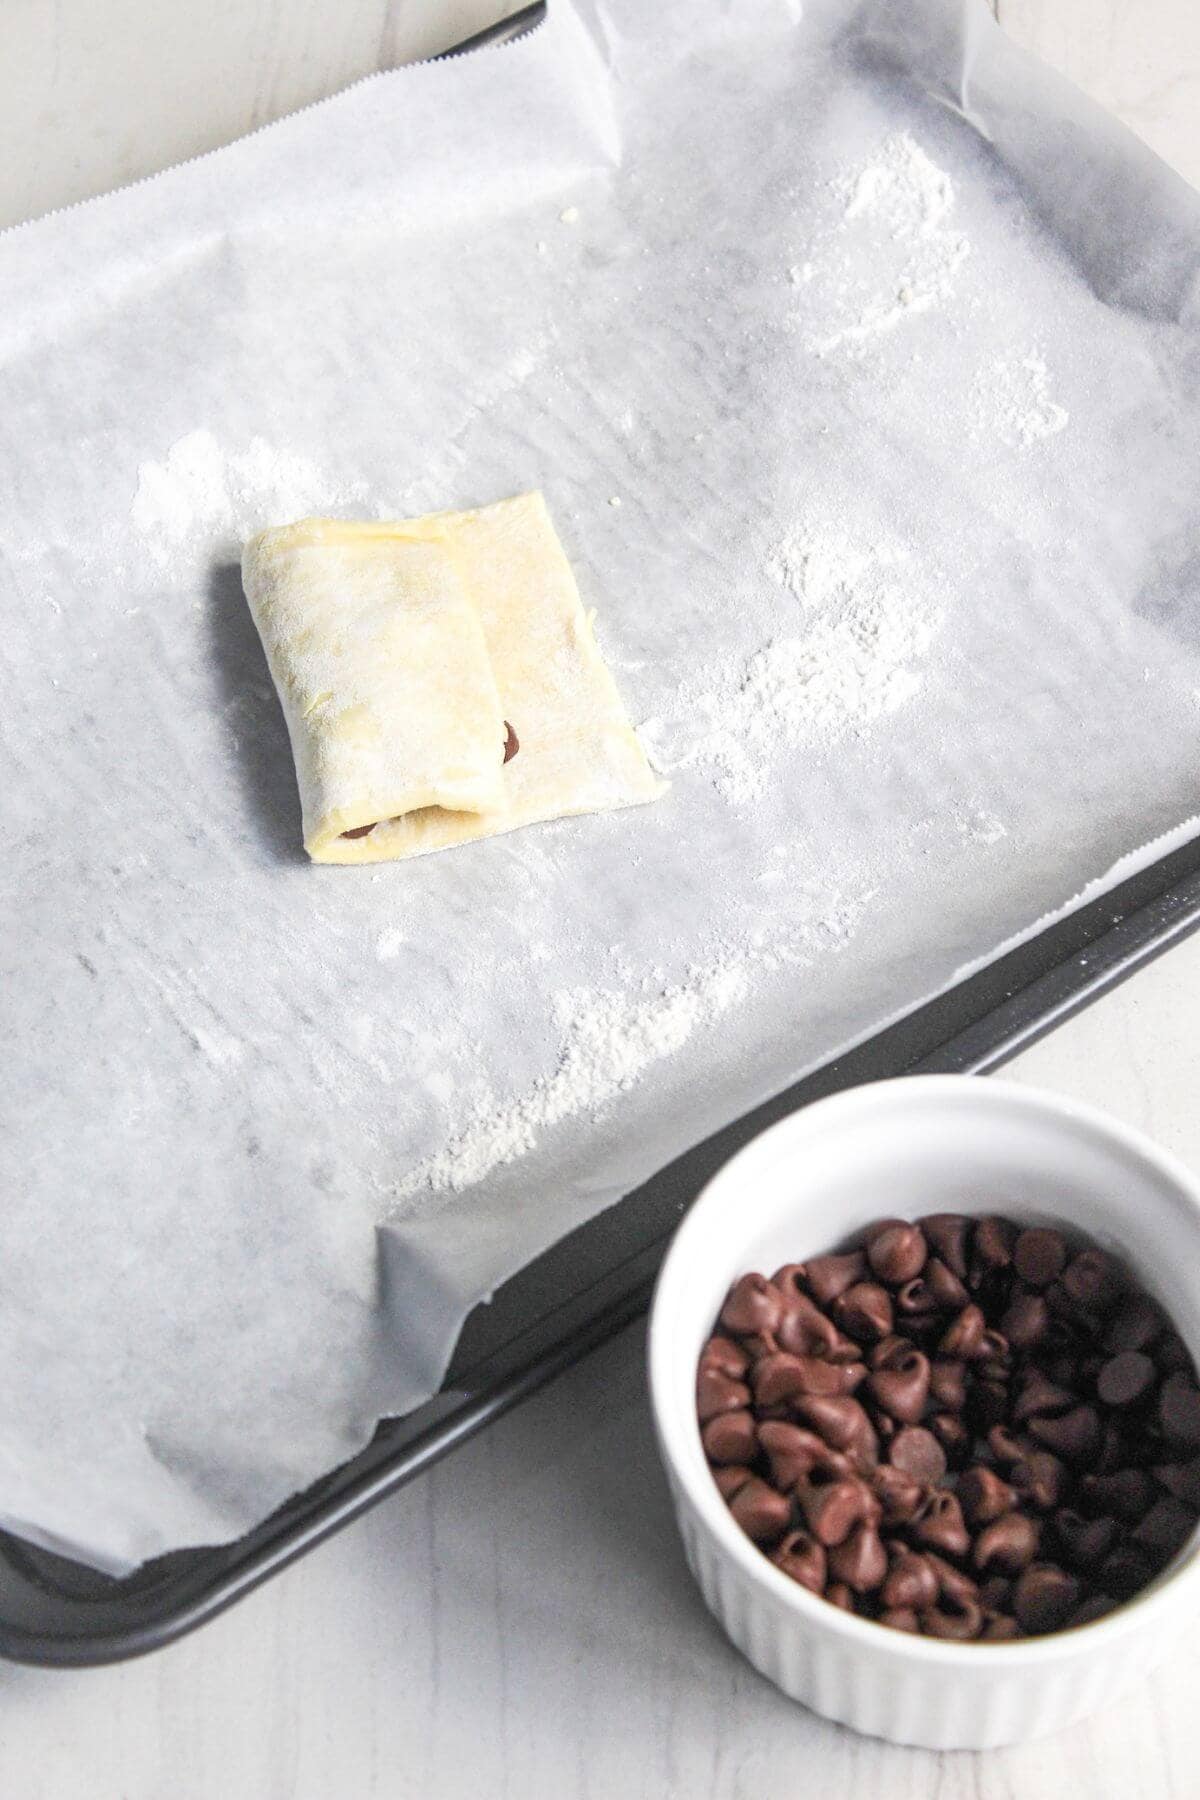 Uncooked filled puff pastry on a baking sheet with parchment paper, next to a small bowl of chocolate chips.